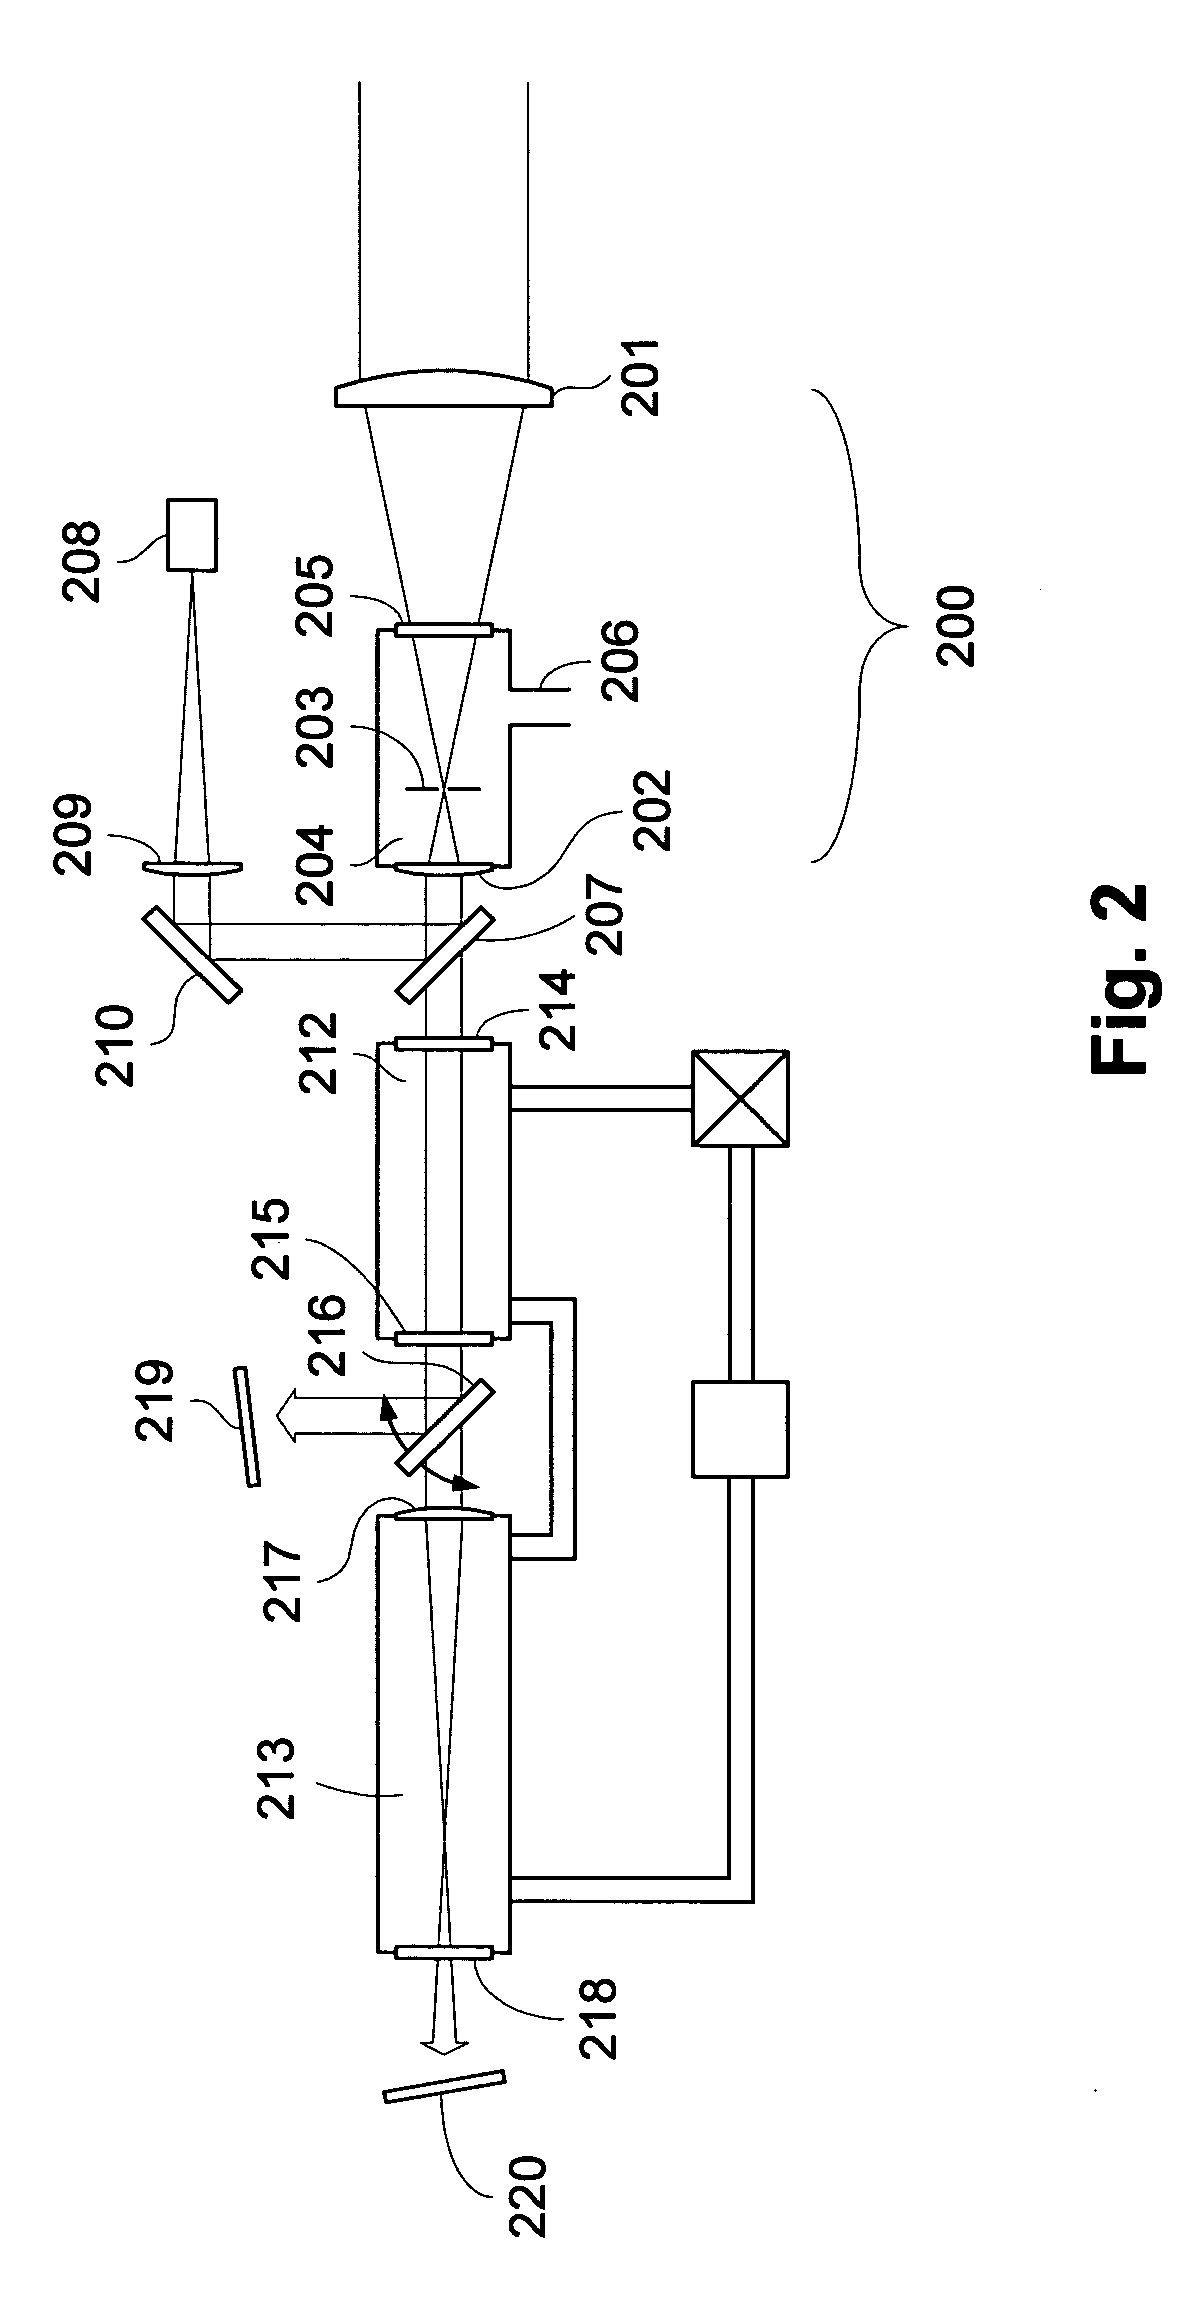 Target isolation system, high power laser and laser peening method and system using same